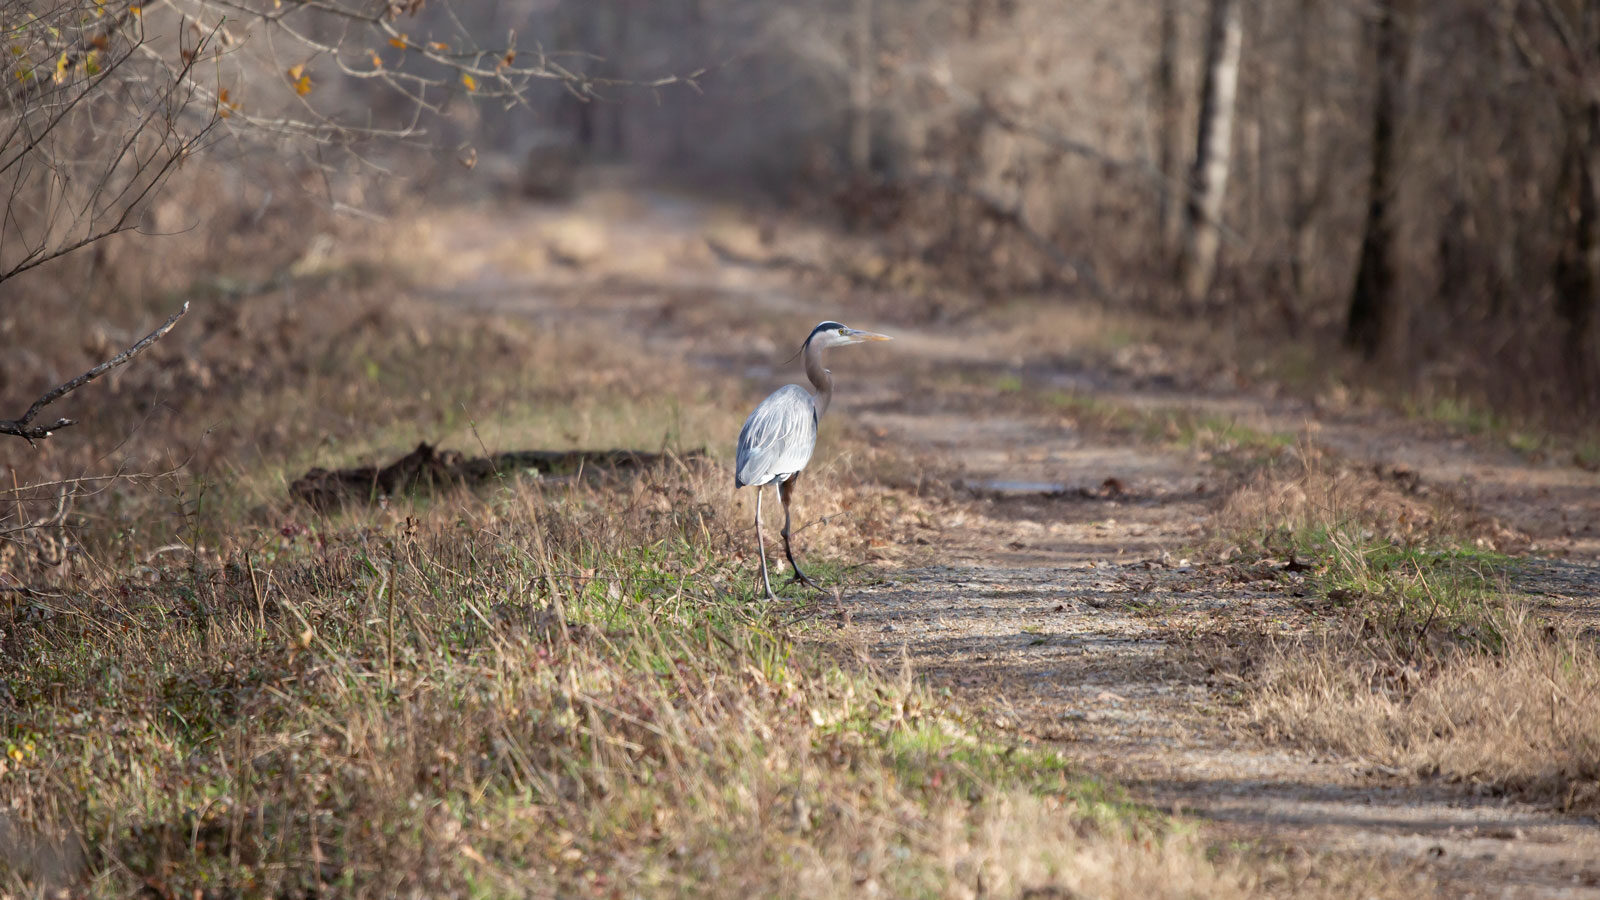 Great blue heron standing on the ground